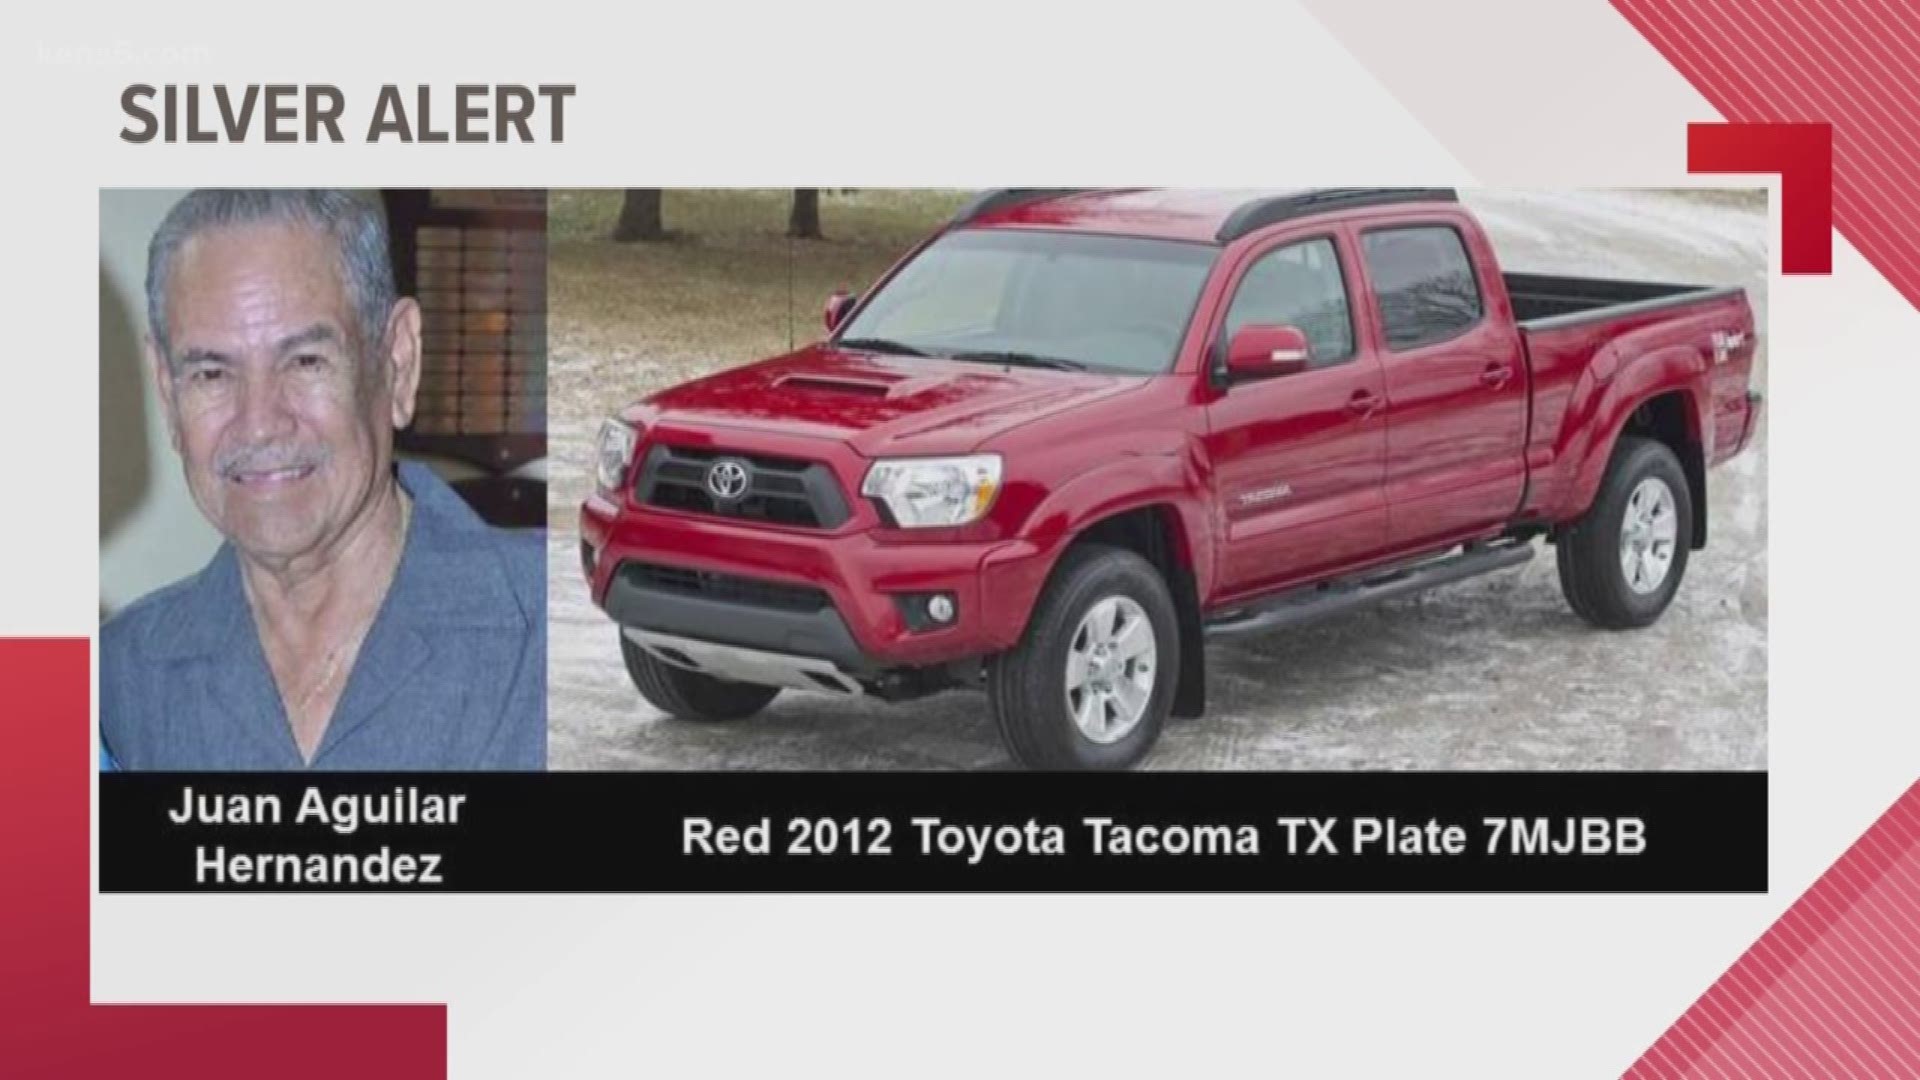 The San Antonio Police Department is searching for 78-year-old Juan Aguilar Hernandez, who was last seen Monday afternoon.